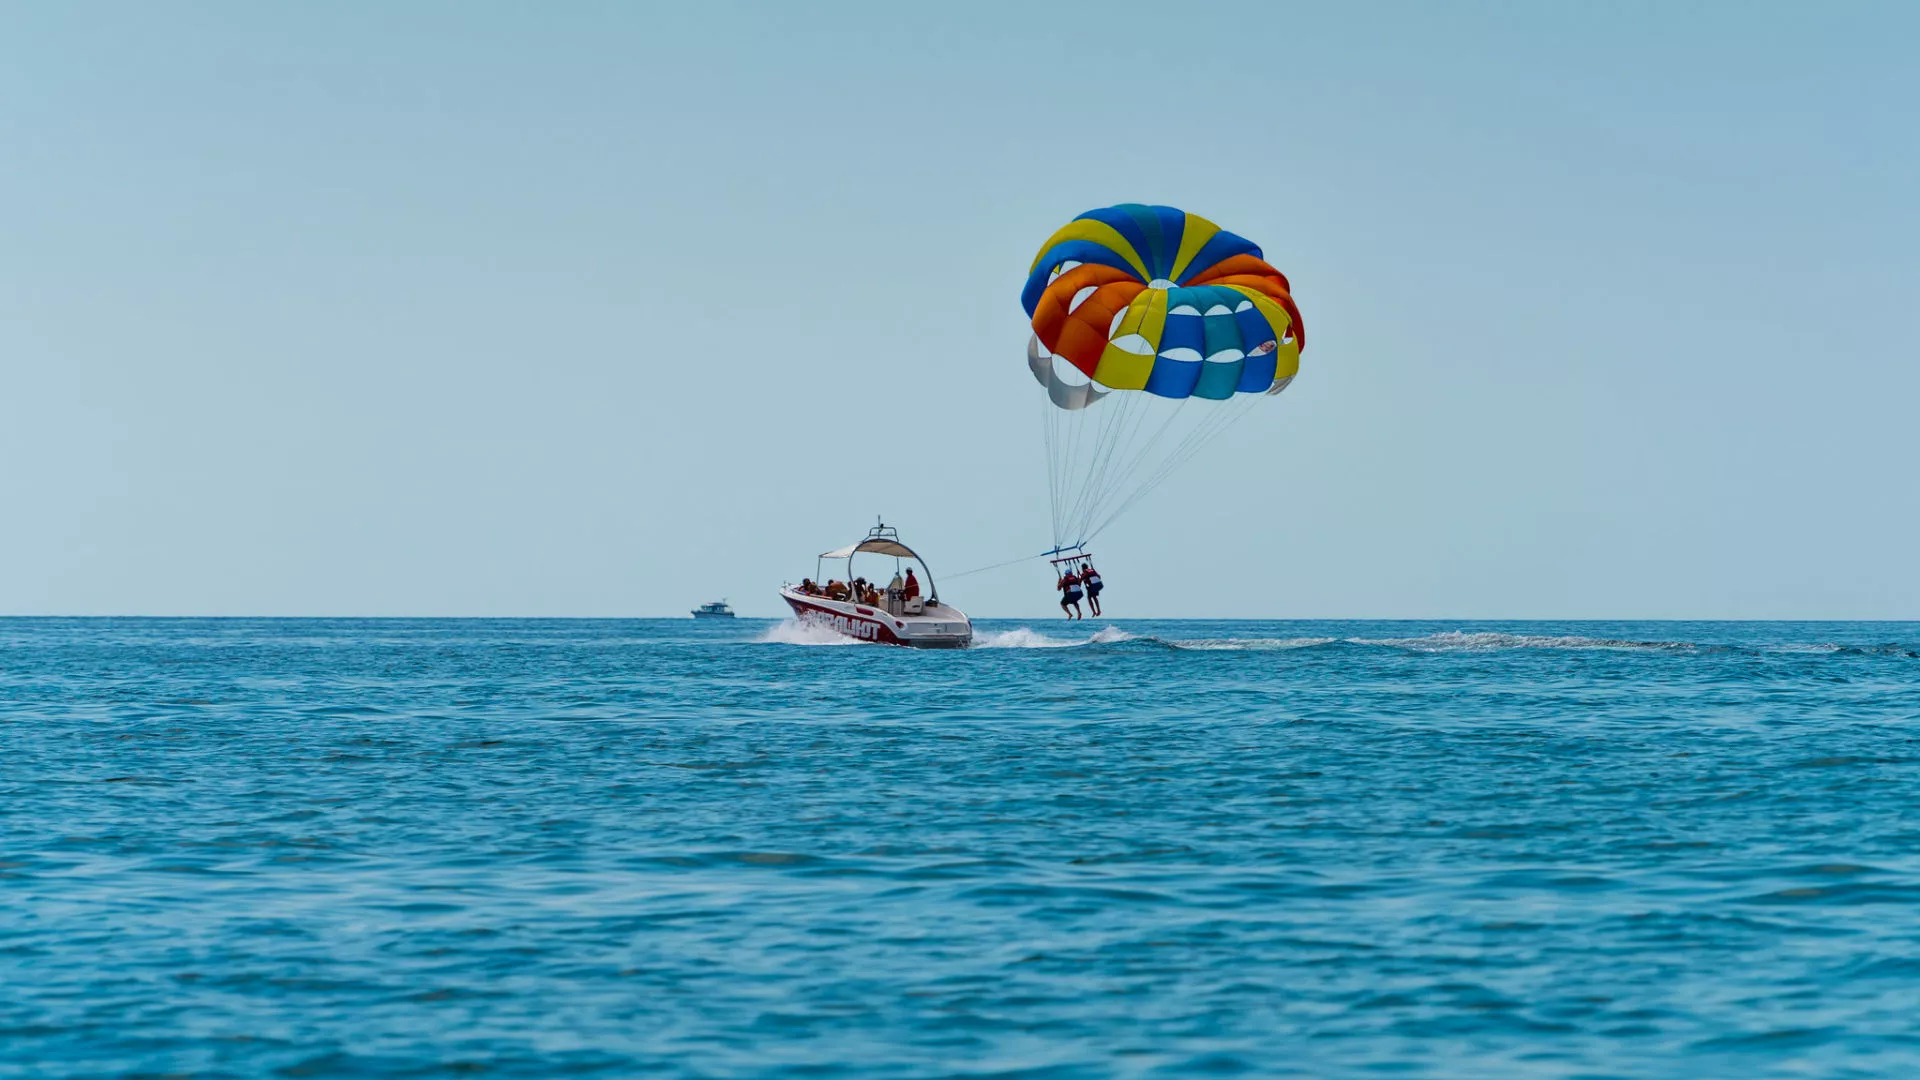 Parasailing Nederland in Netherlands, Europe | Parasailing - Rated 0.9